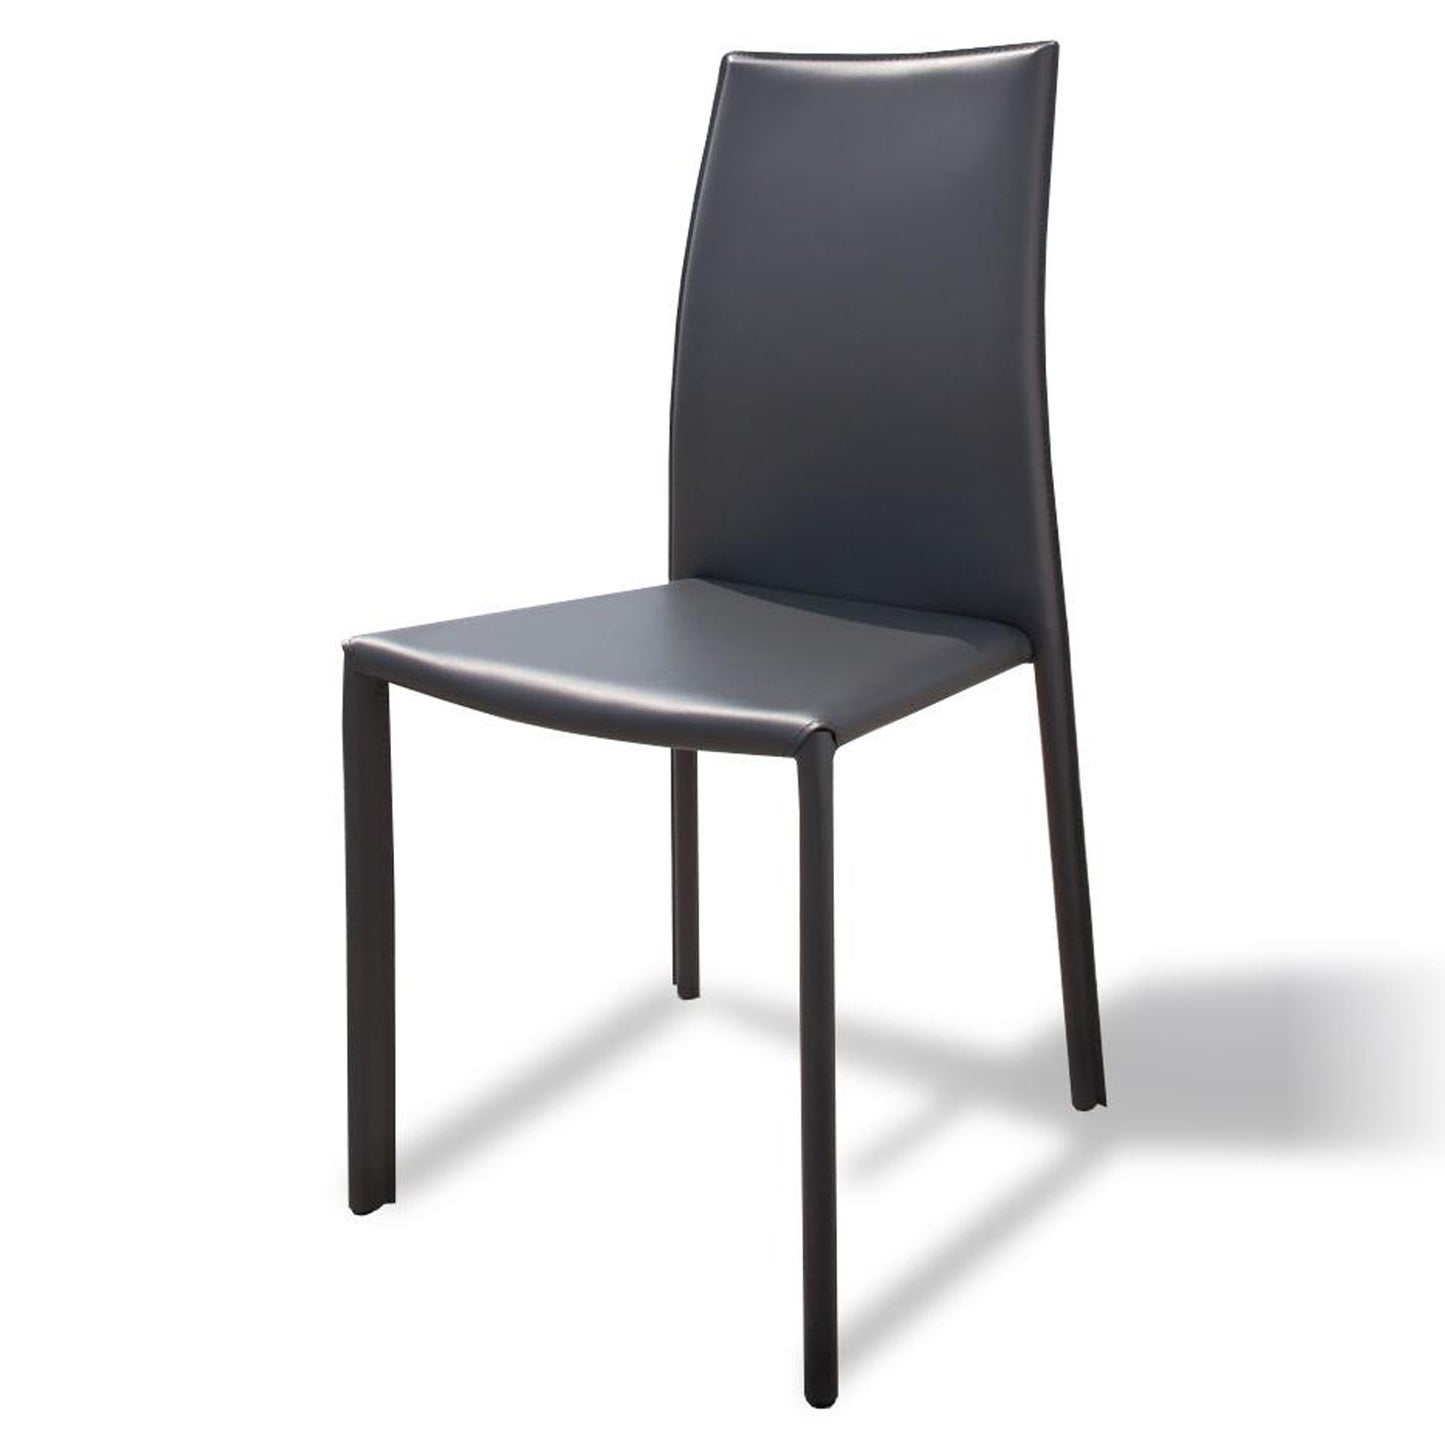 Manila Elegant Real or Eco Leather Dining Chair by Imperial Line